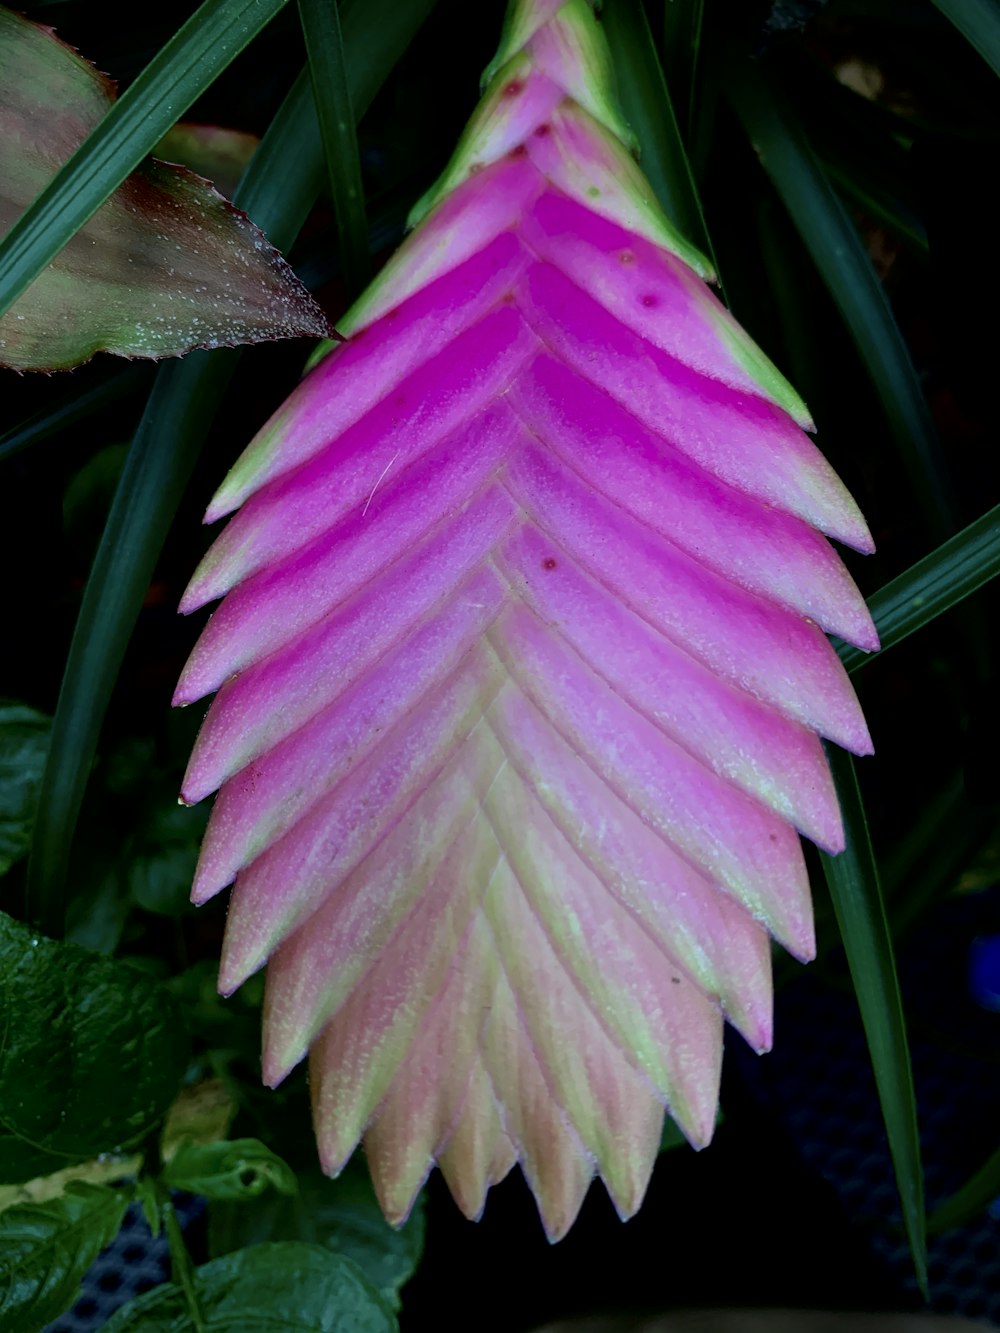 pink and green flower in close up photography